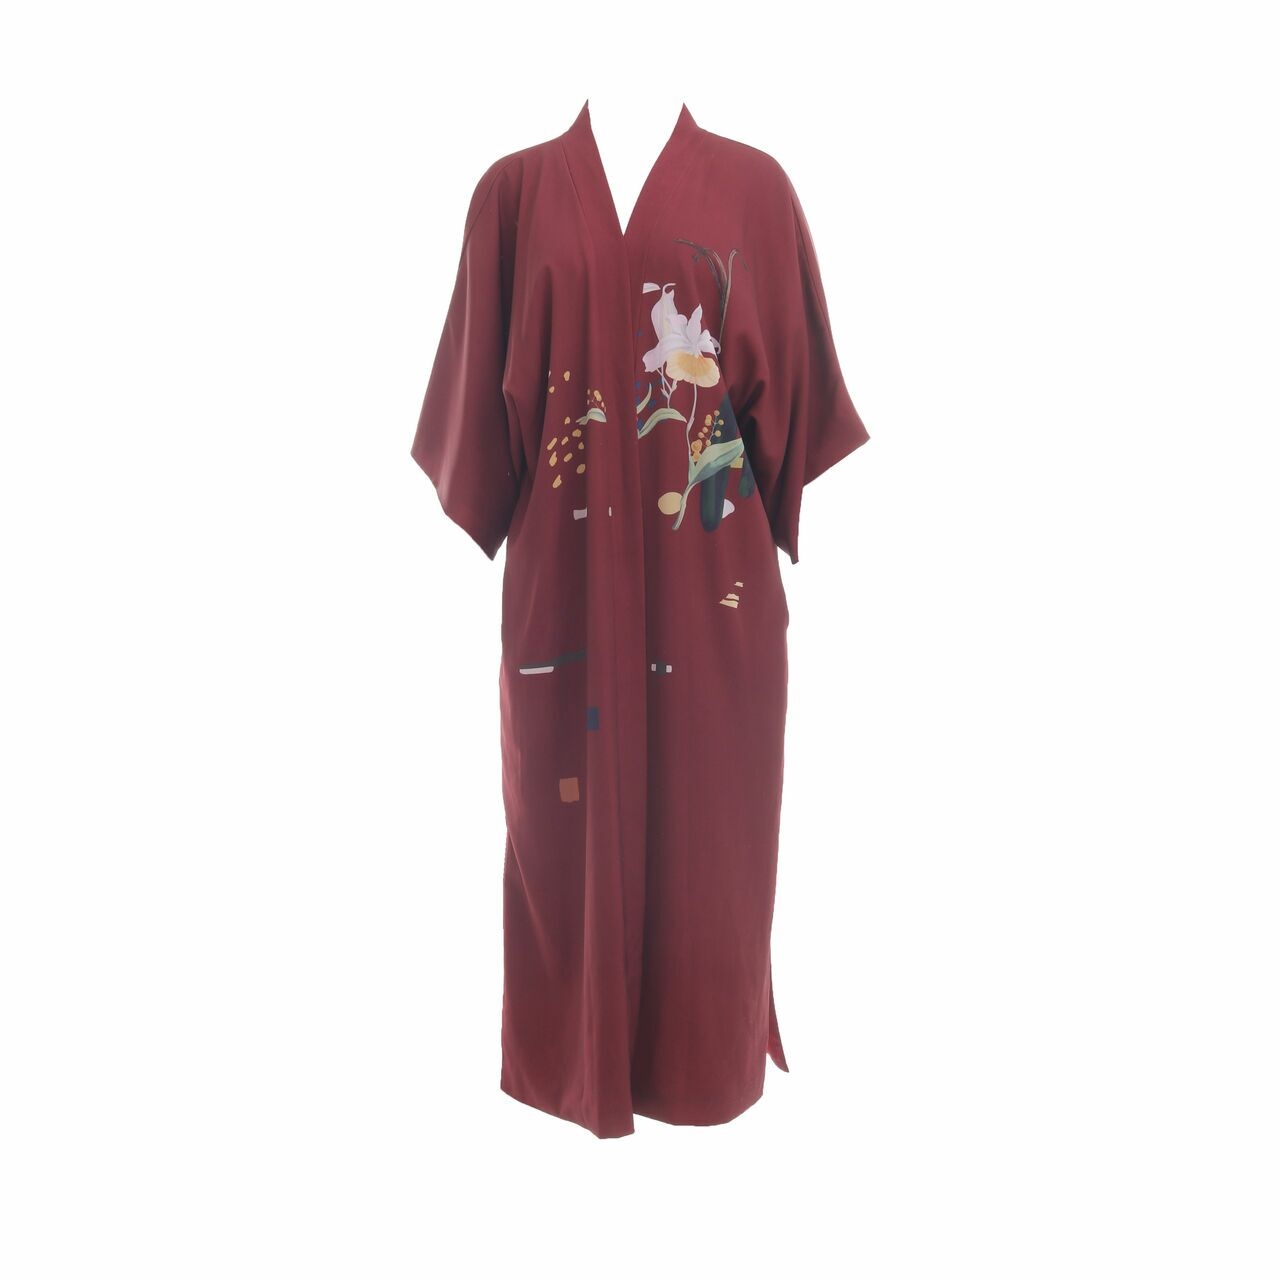 Our Second Nature Maroon Floral Kimono